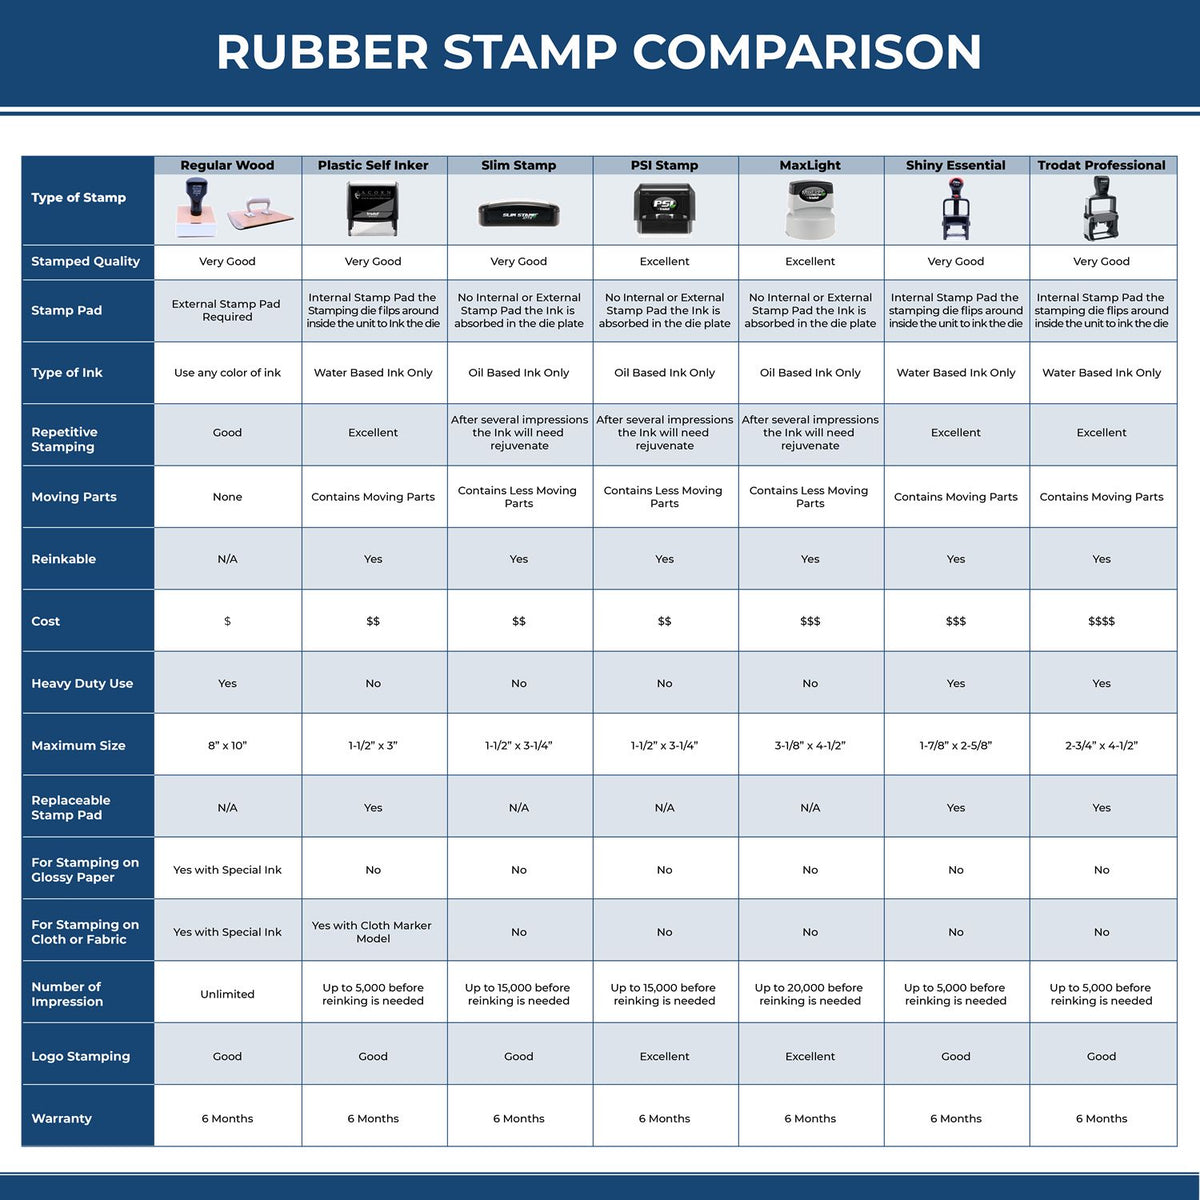 Review and Sign Rubber Stamp 4780R Rubber Stamp Comparison